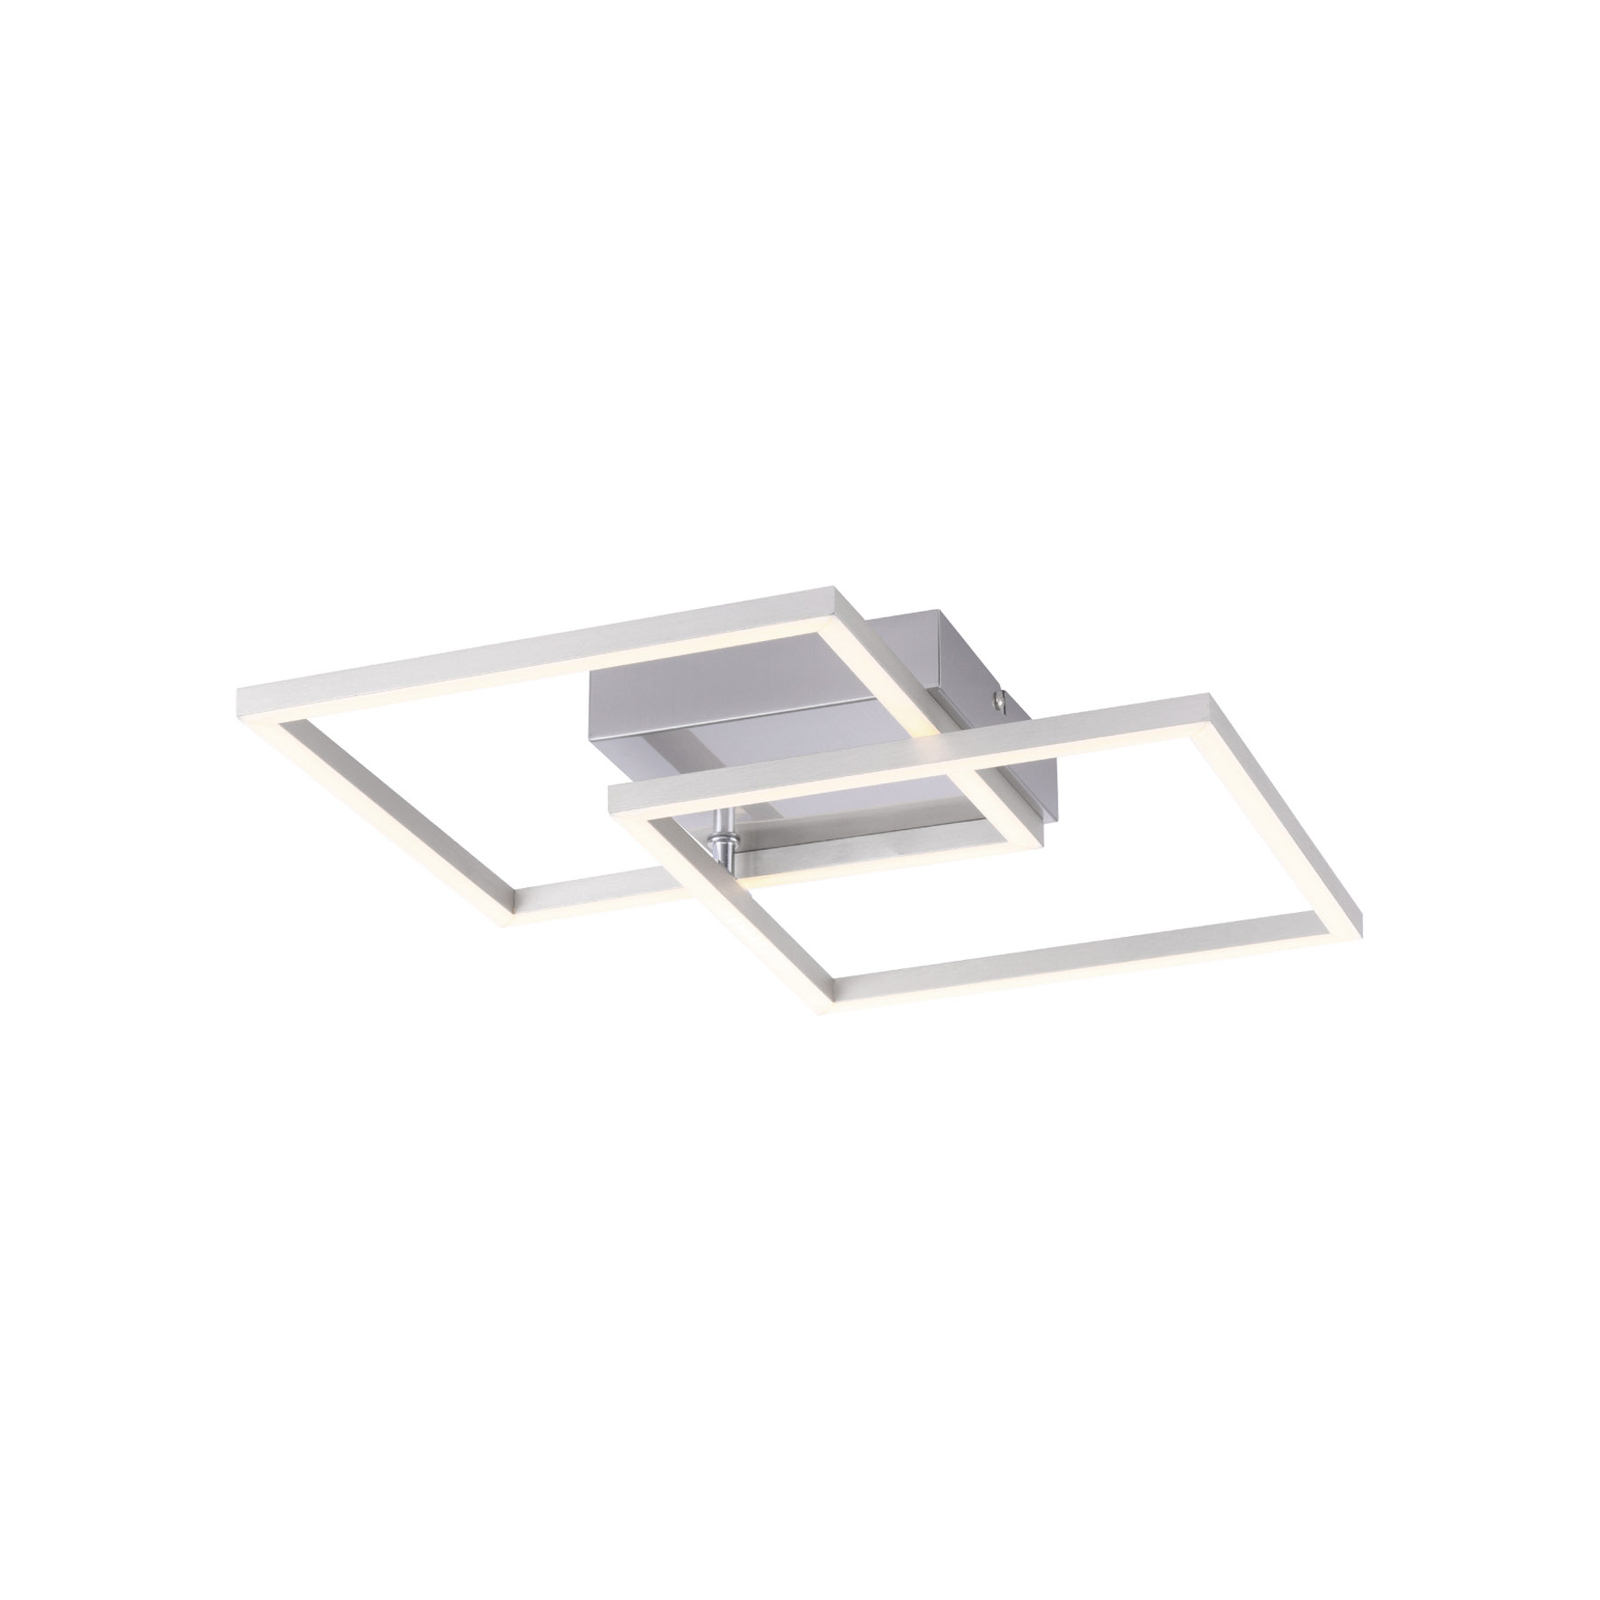 Iven LED plafondlamp, staal, 35,9x35,9cm